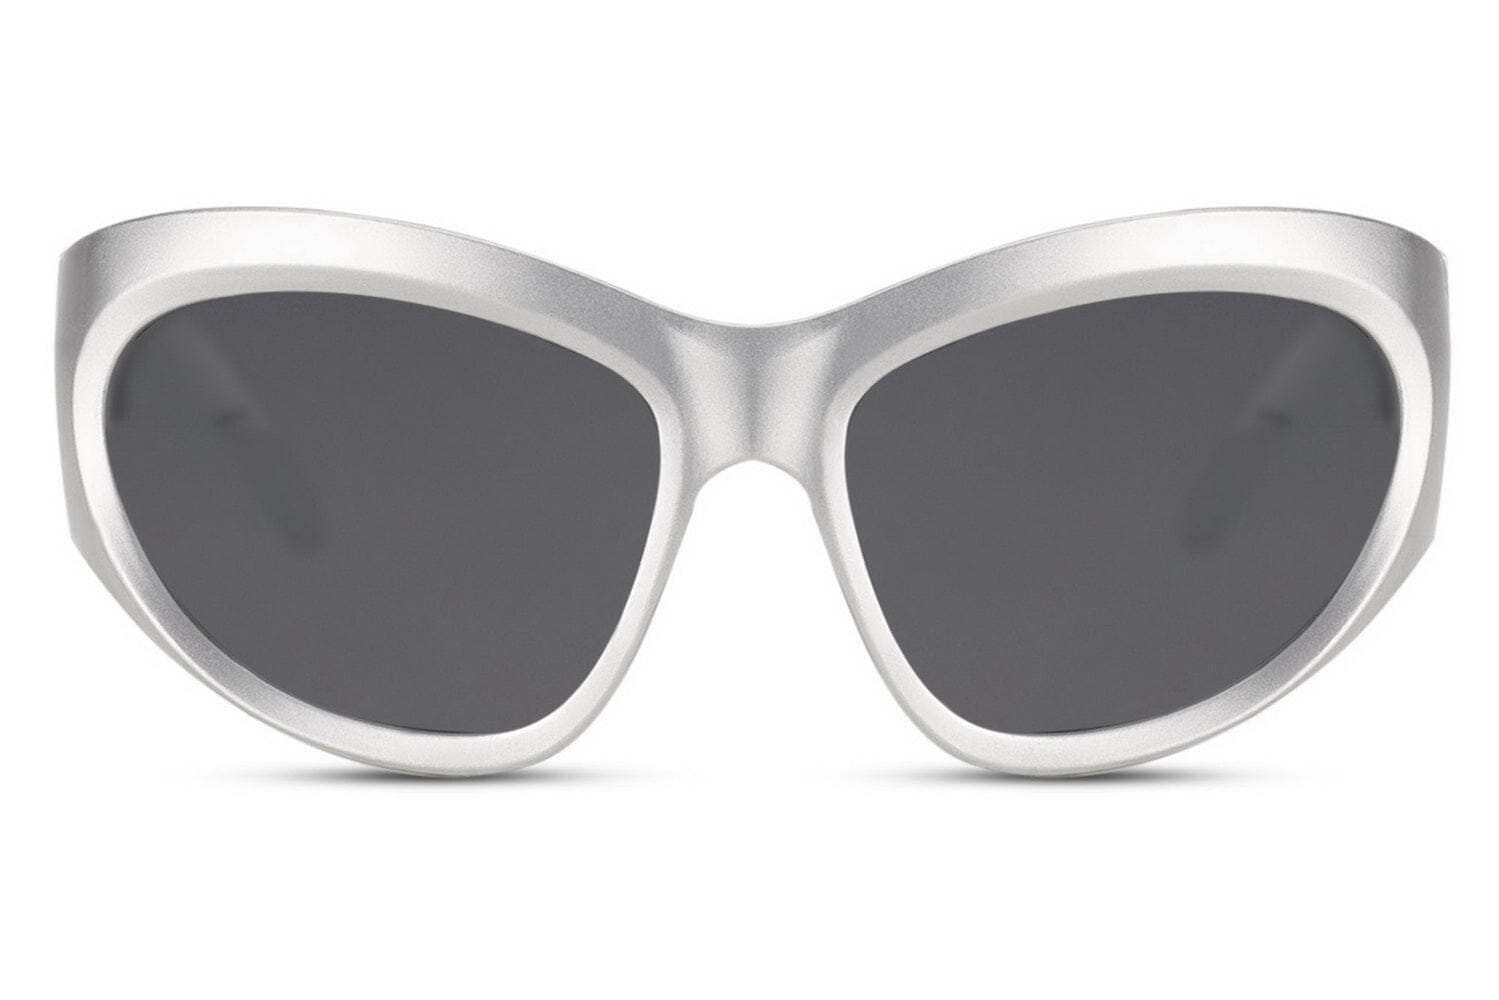 Silver shield sunglasses. Large silver with grey lenses.